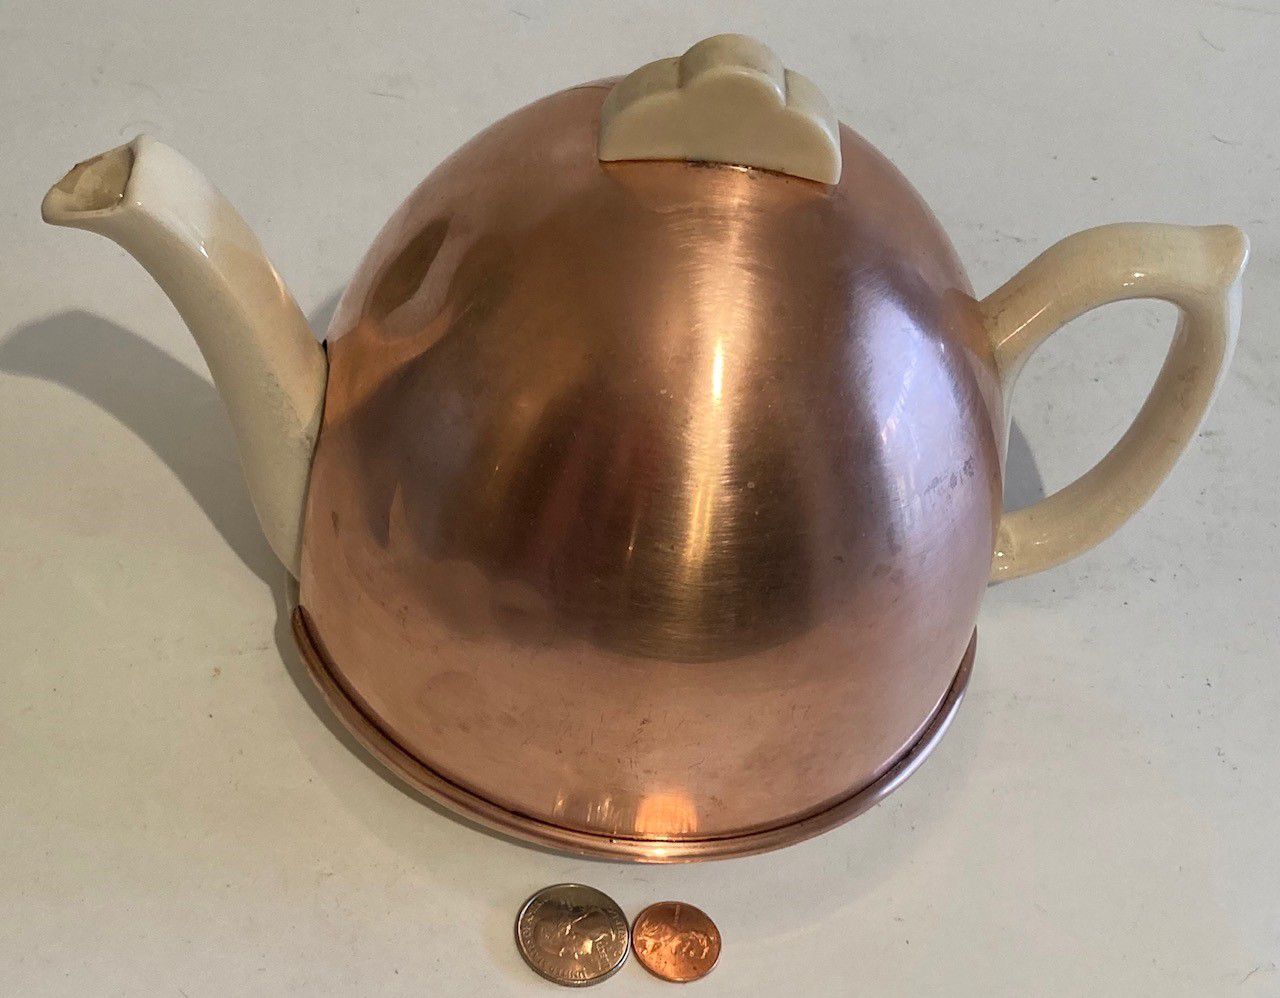 Vintage Copper Metal and Porcelain Tea Pot, Tea Kettle, Made in England, 10" x 6", Kitchen Decor, Use It, Table Display, Shelf Display